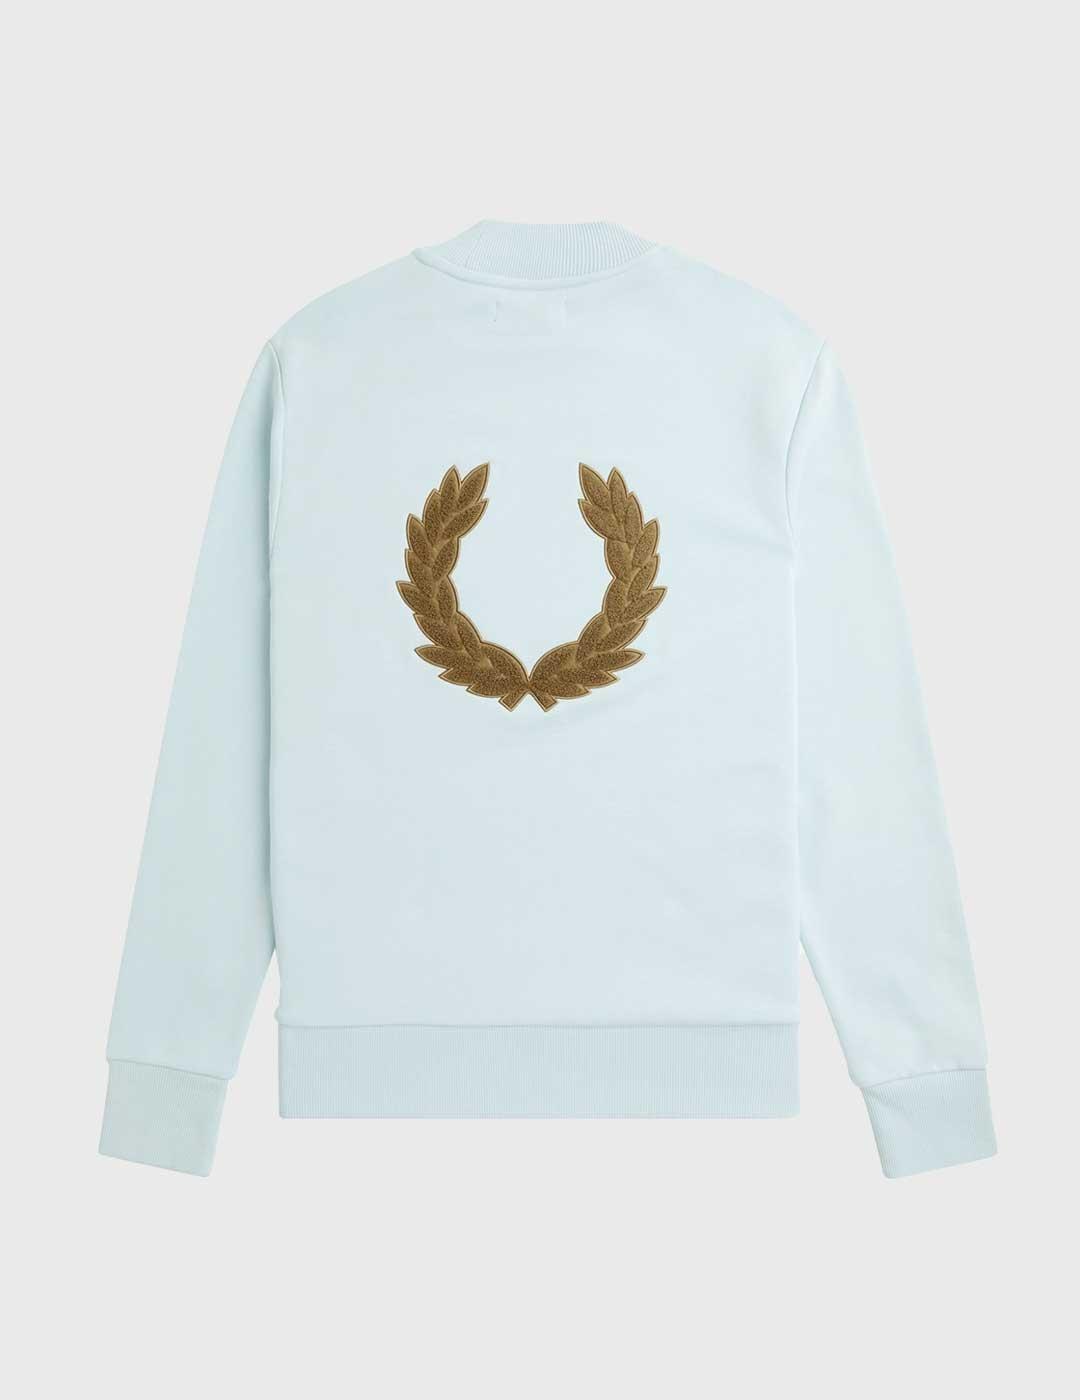 Fred Perry Laurel Wreath Graphic High Neck Sudadera azul